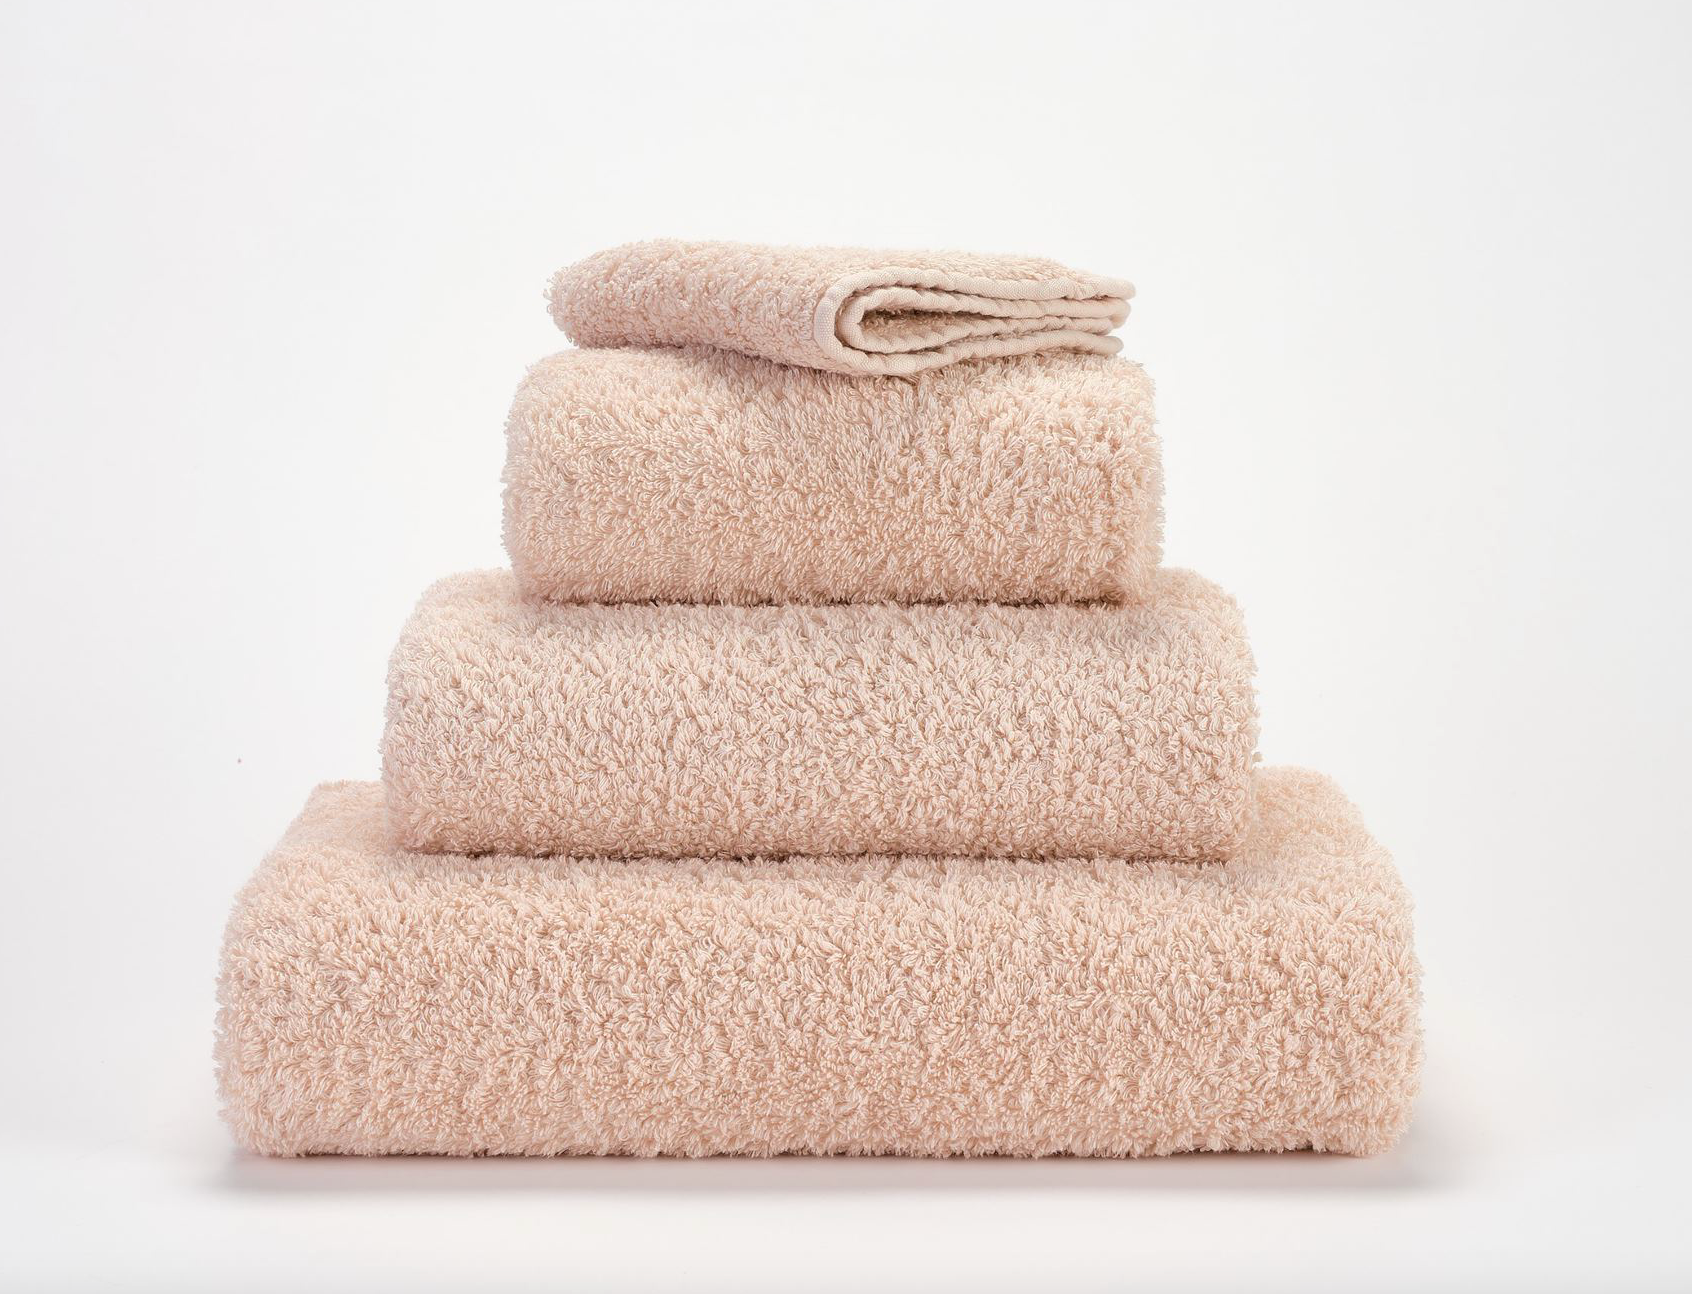 Towels color Nude